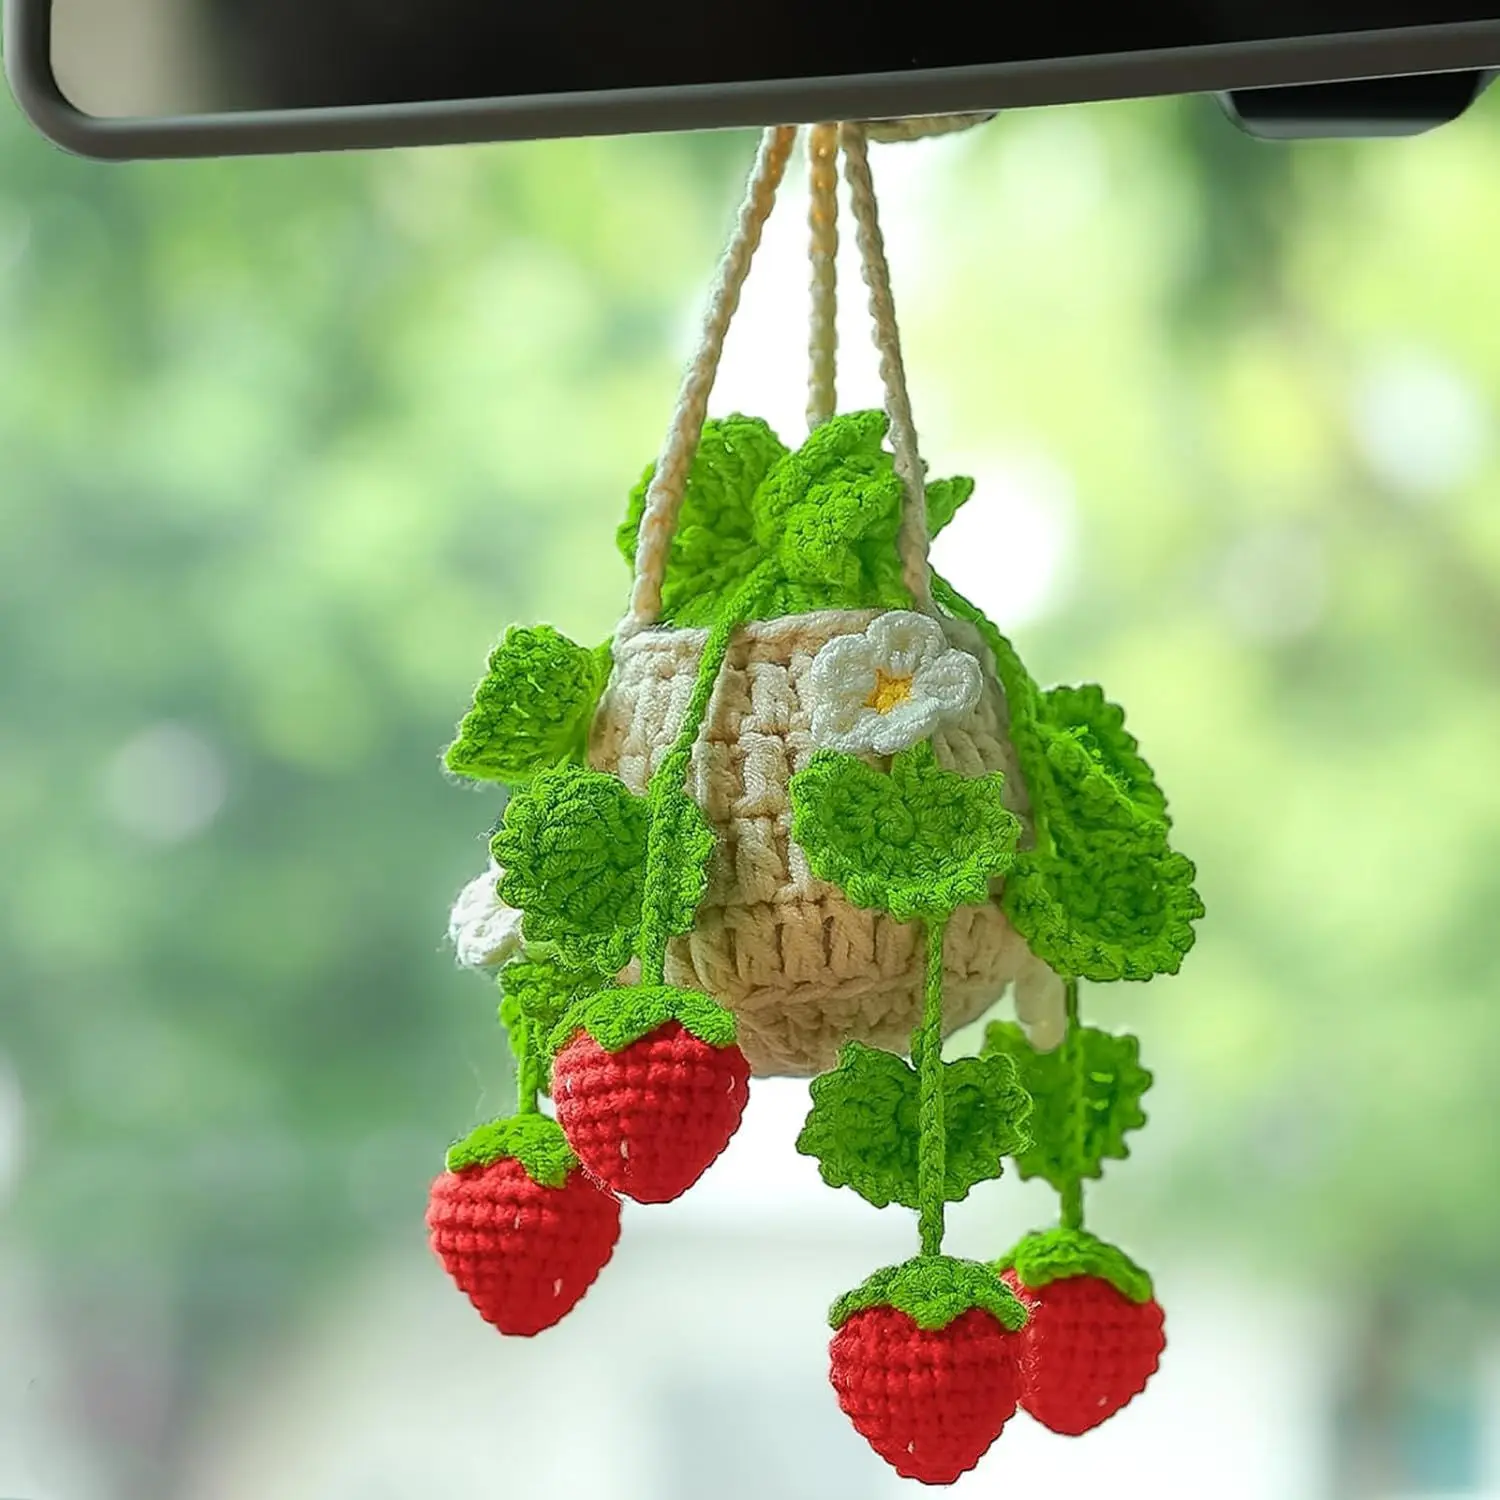 Rochet hanging basket plant strawberry hanging plant for car decor car ornaments charms thumb200